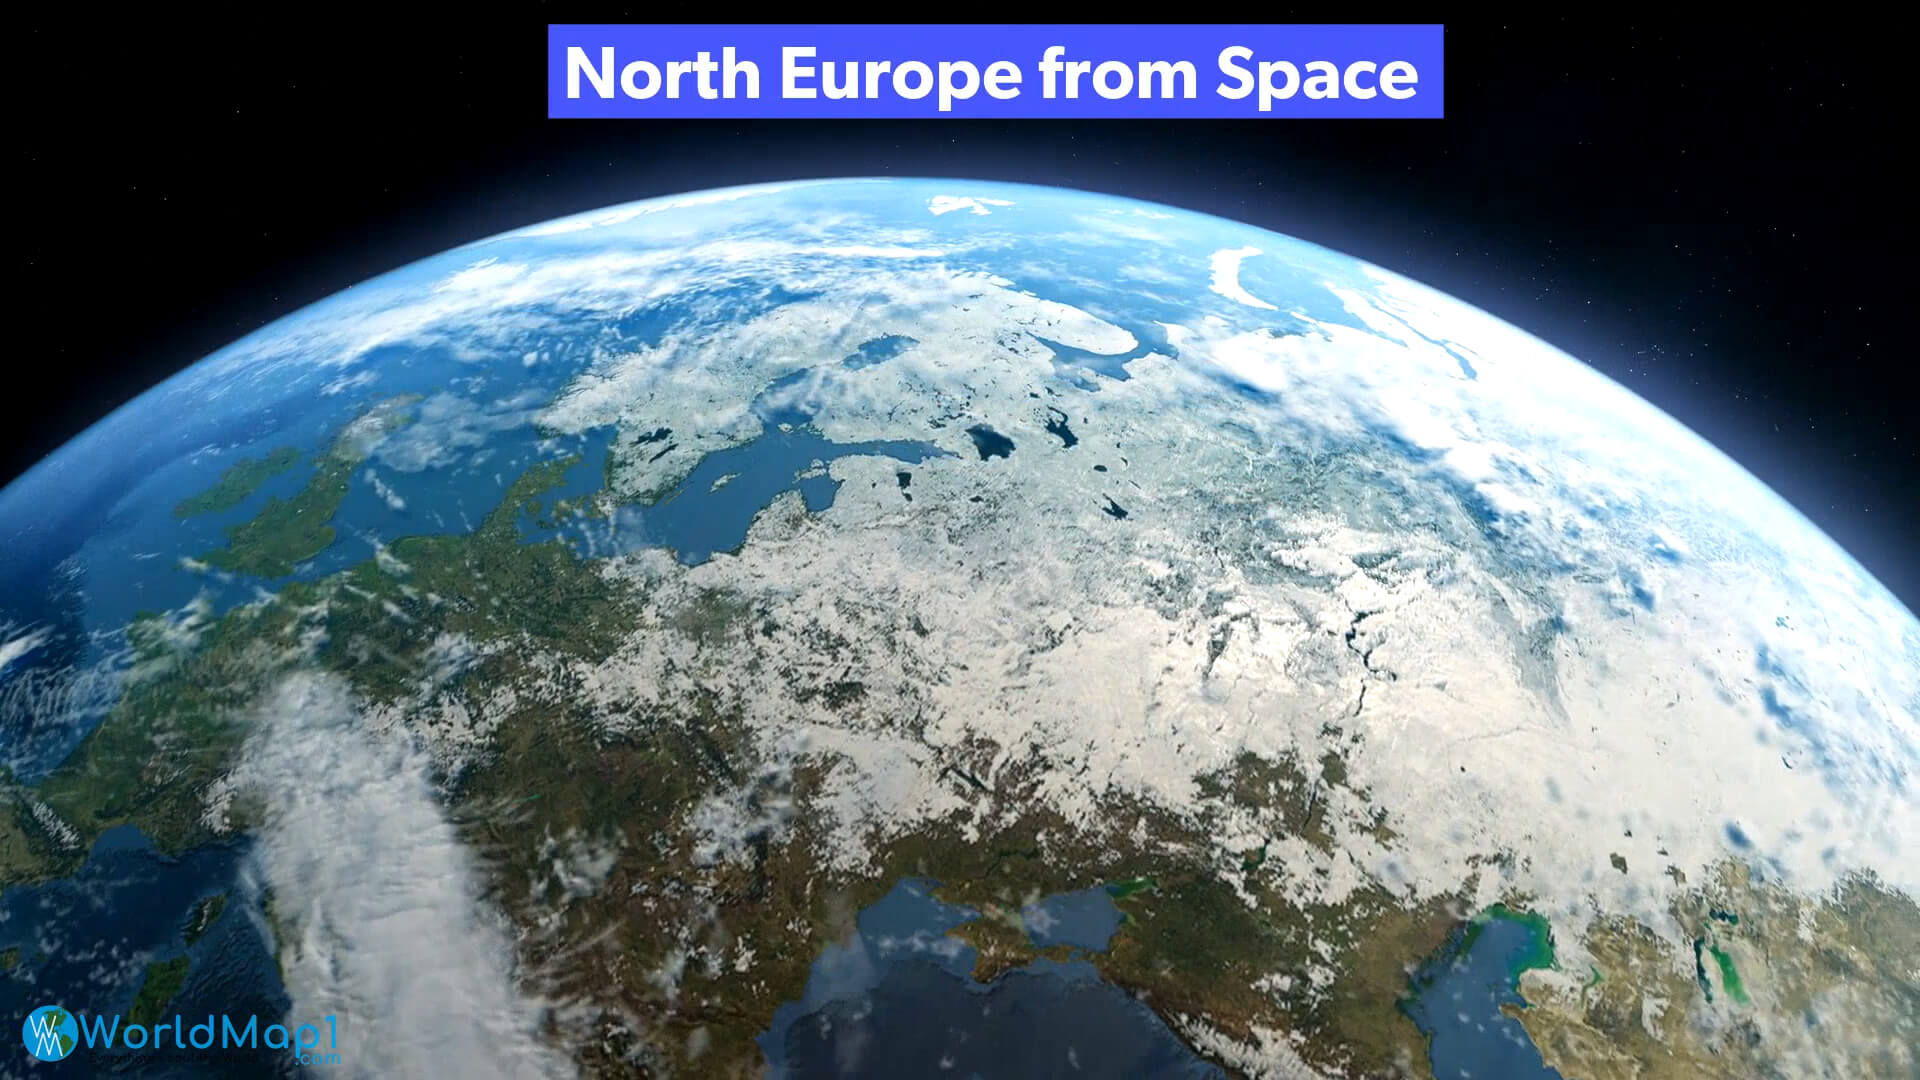 North Europe from Space